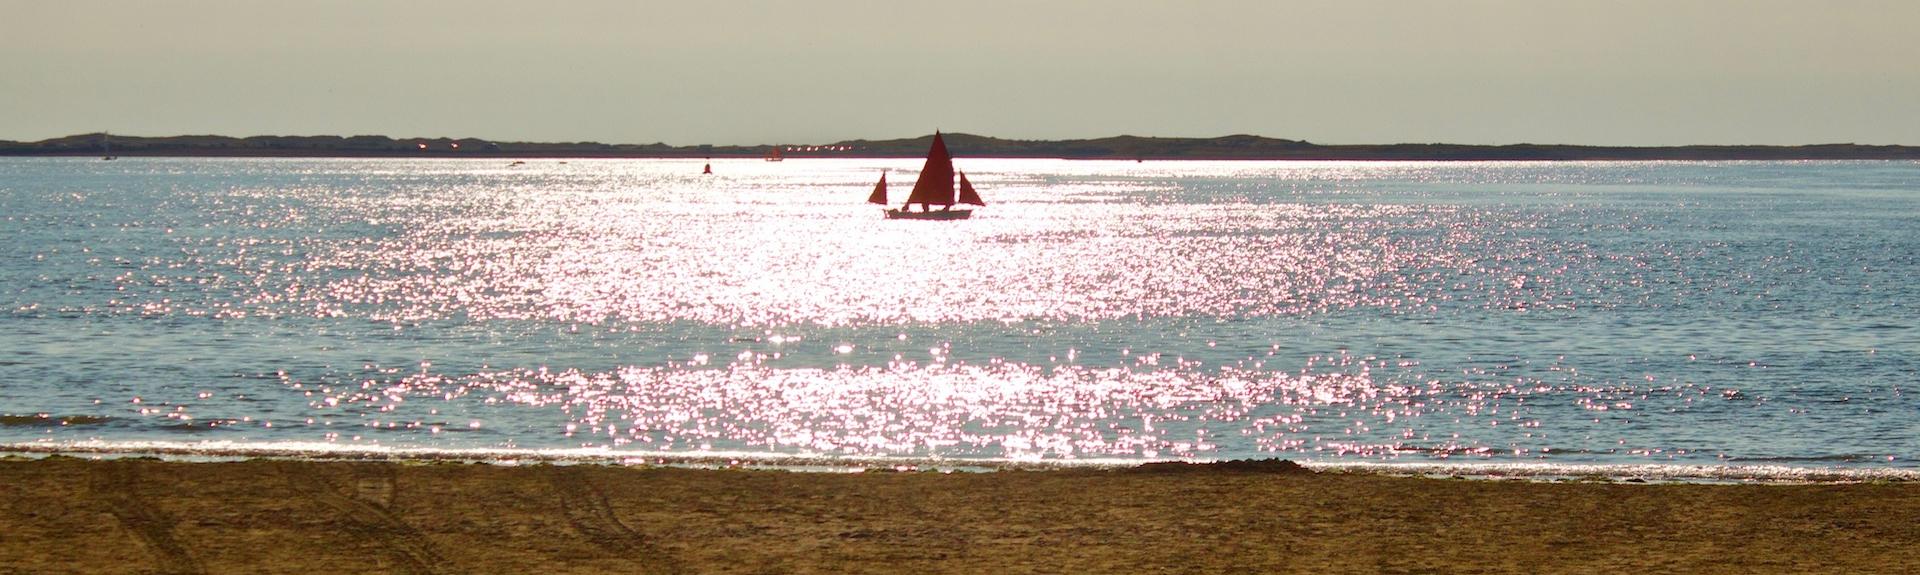 A sailing boat silhouetted against sunlit waves off Instow Beach in North Devon 